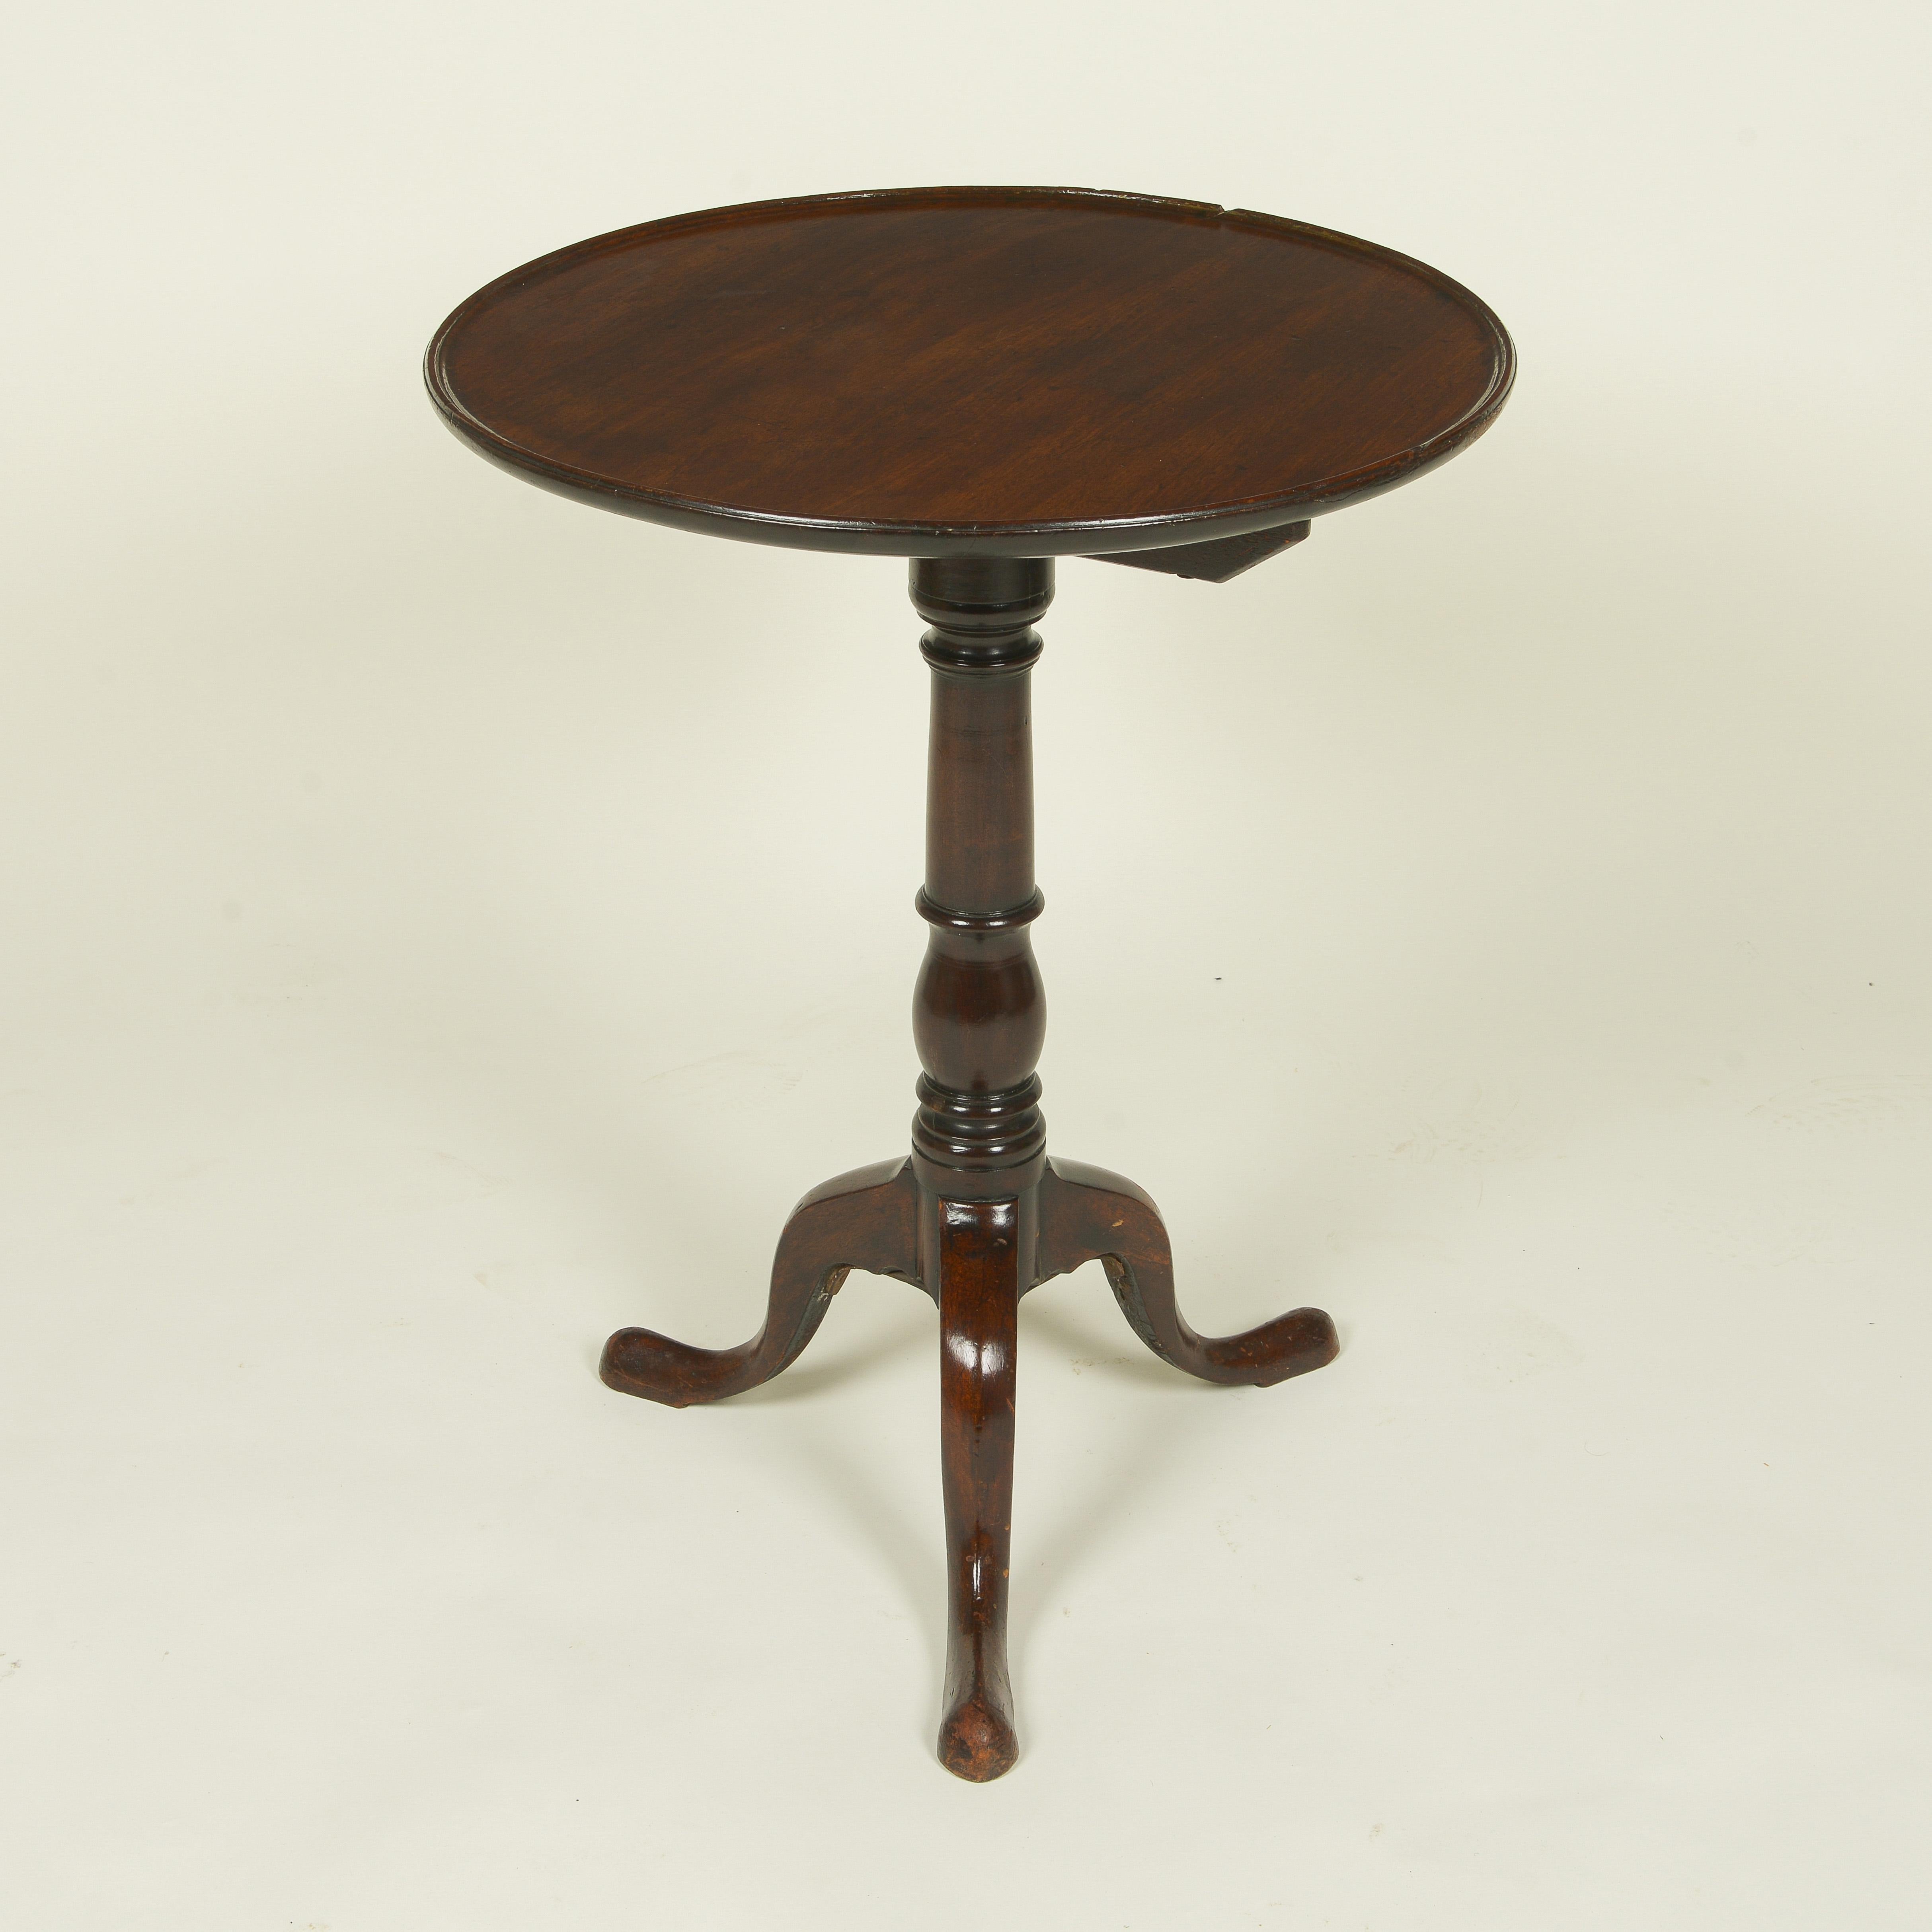 The round top with dished top; raised on a turned columnar support on three downswept legs terminating in pad feet.